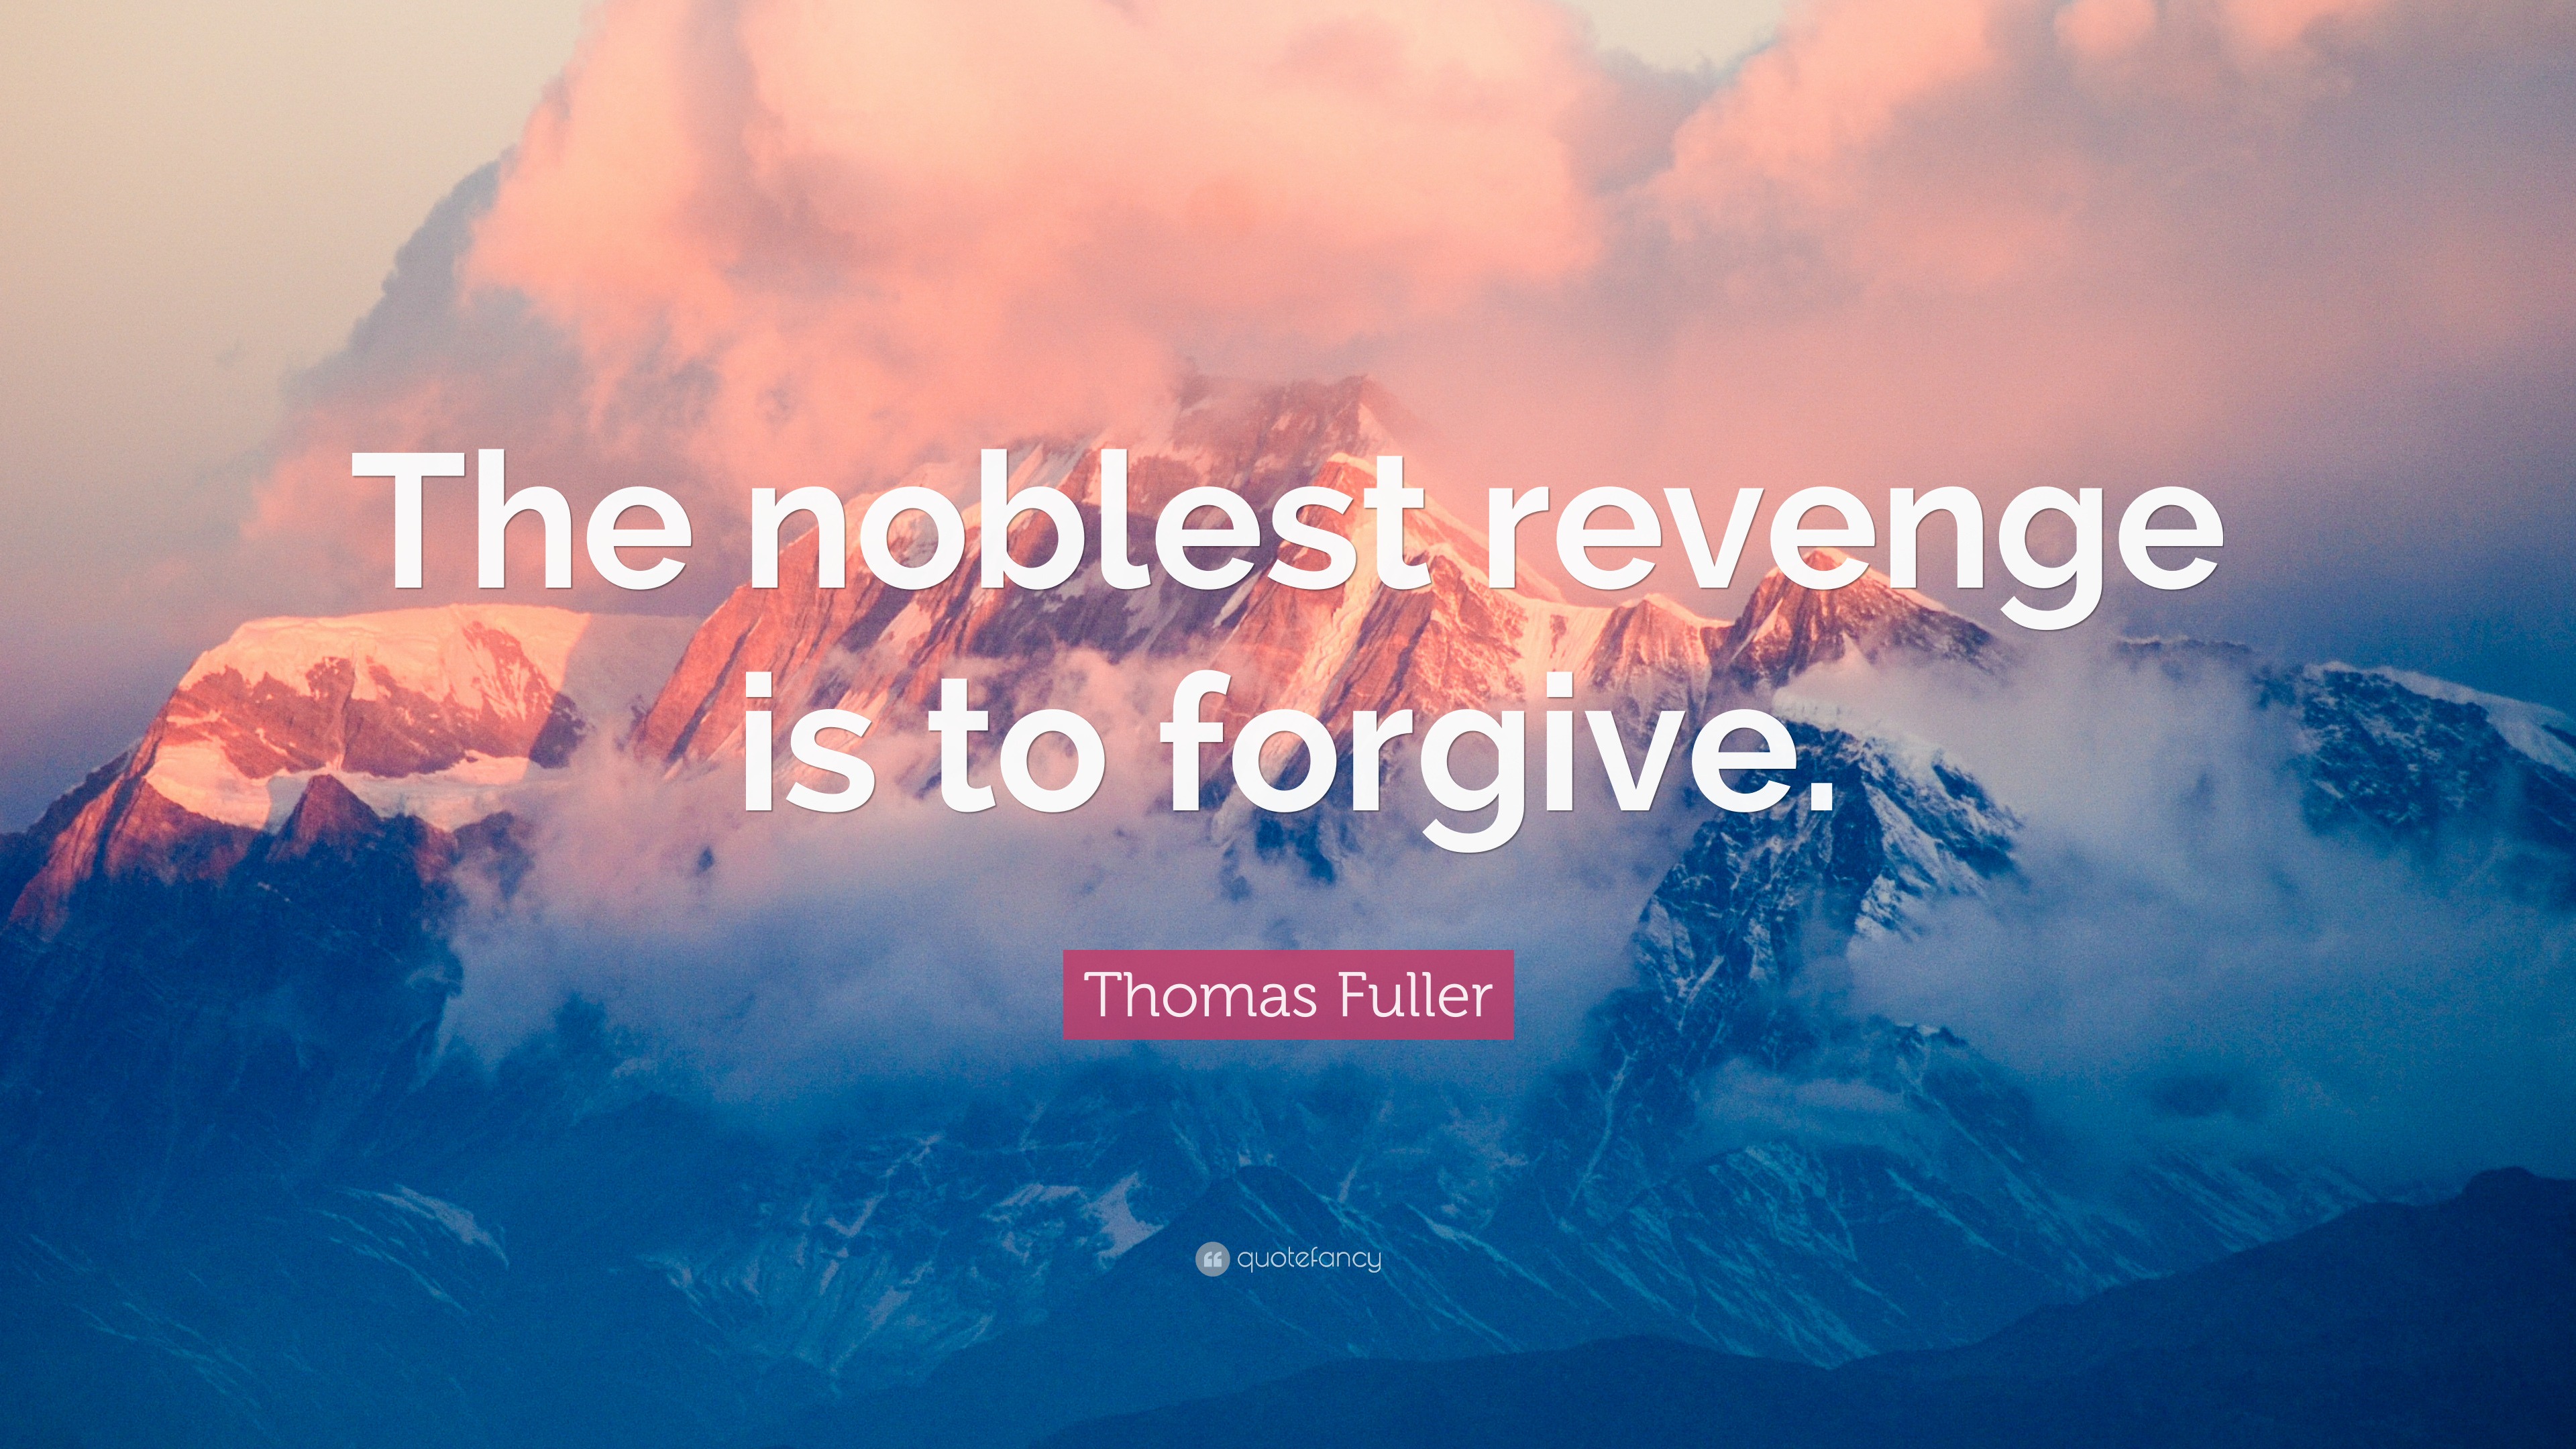 Thomas Fuller Quote: “The noblest revenge is to forgive.” (20